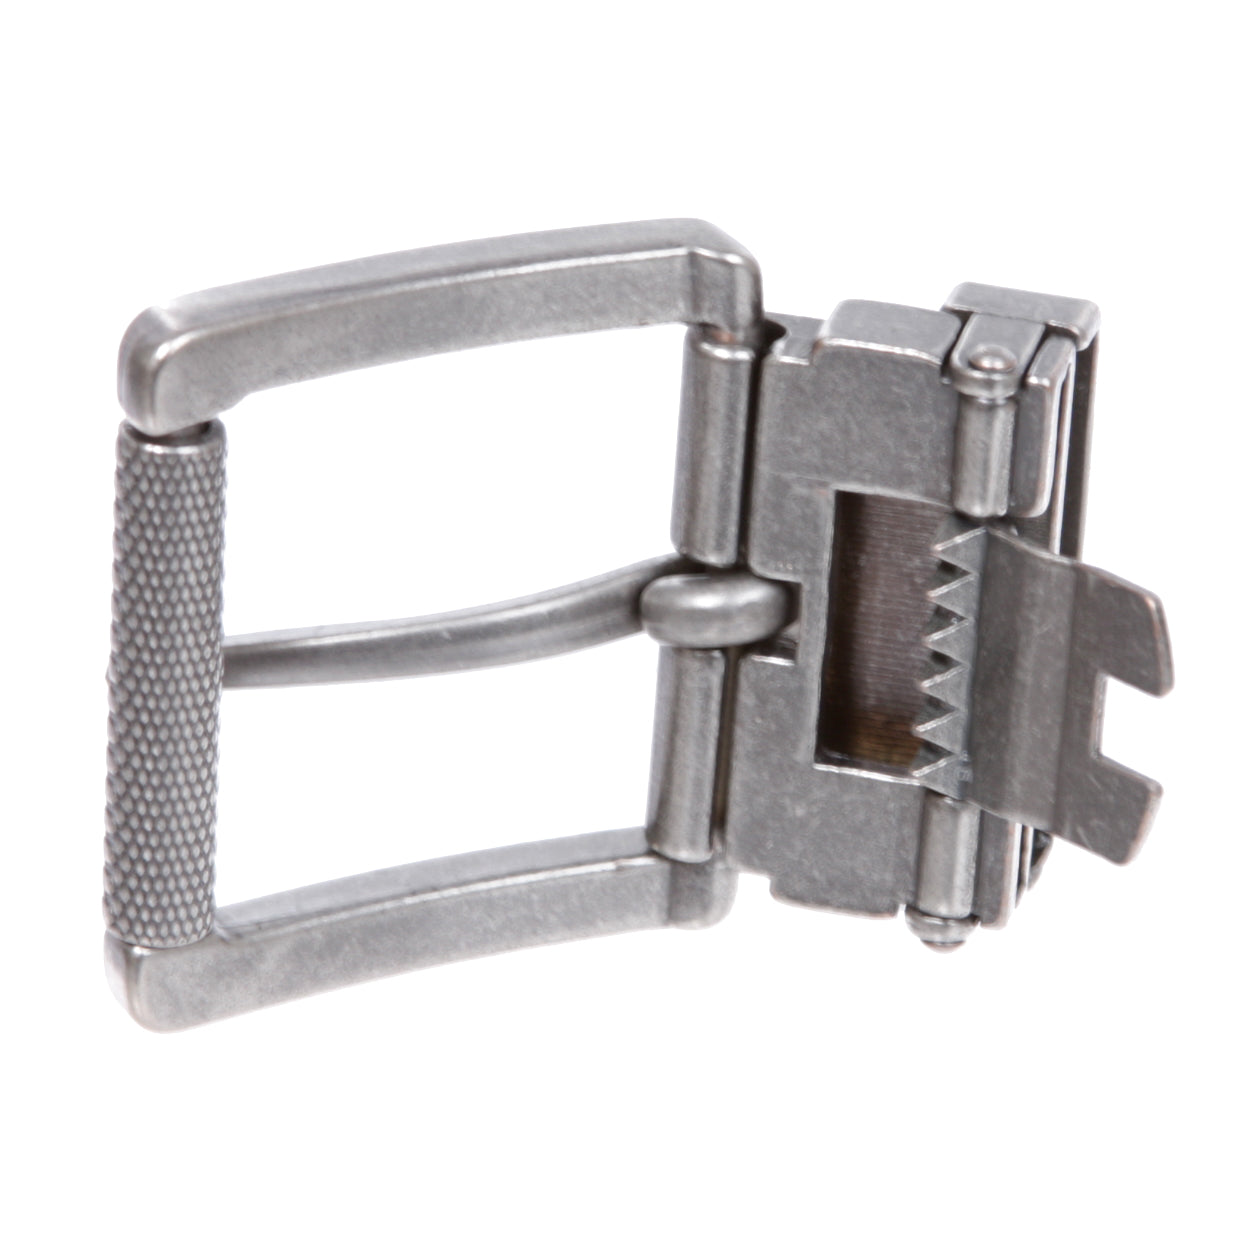 1 1/2" (37.5 mm) Nickel Free Roller Square Clamp Belt Buckle